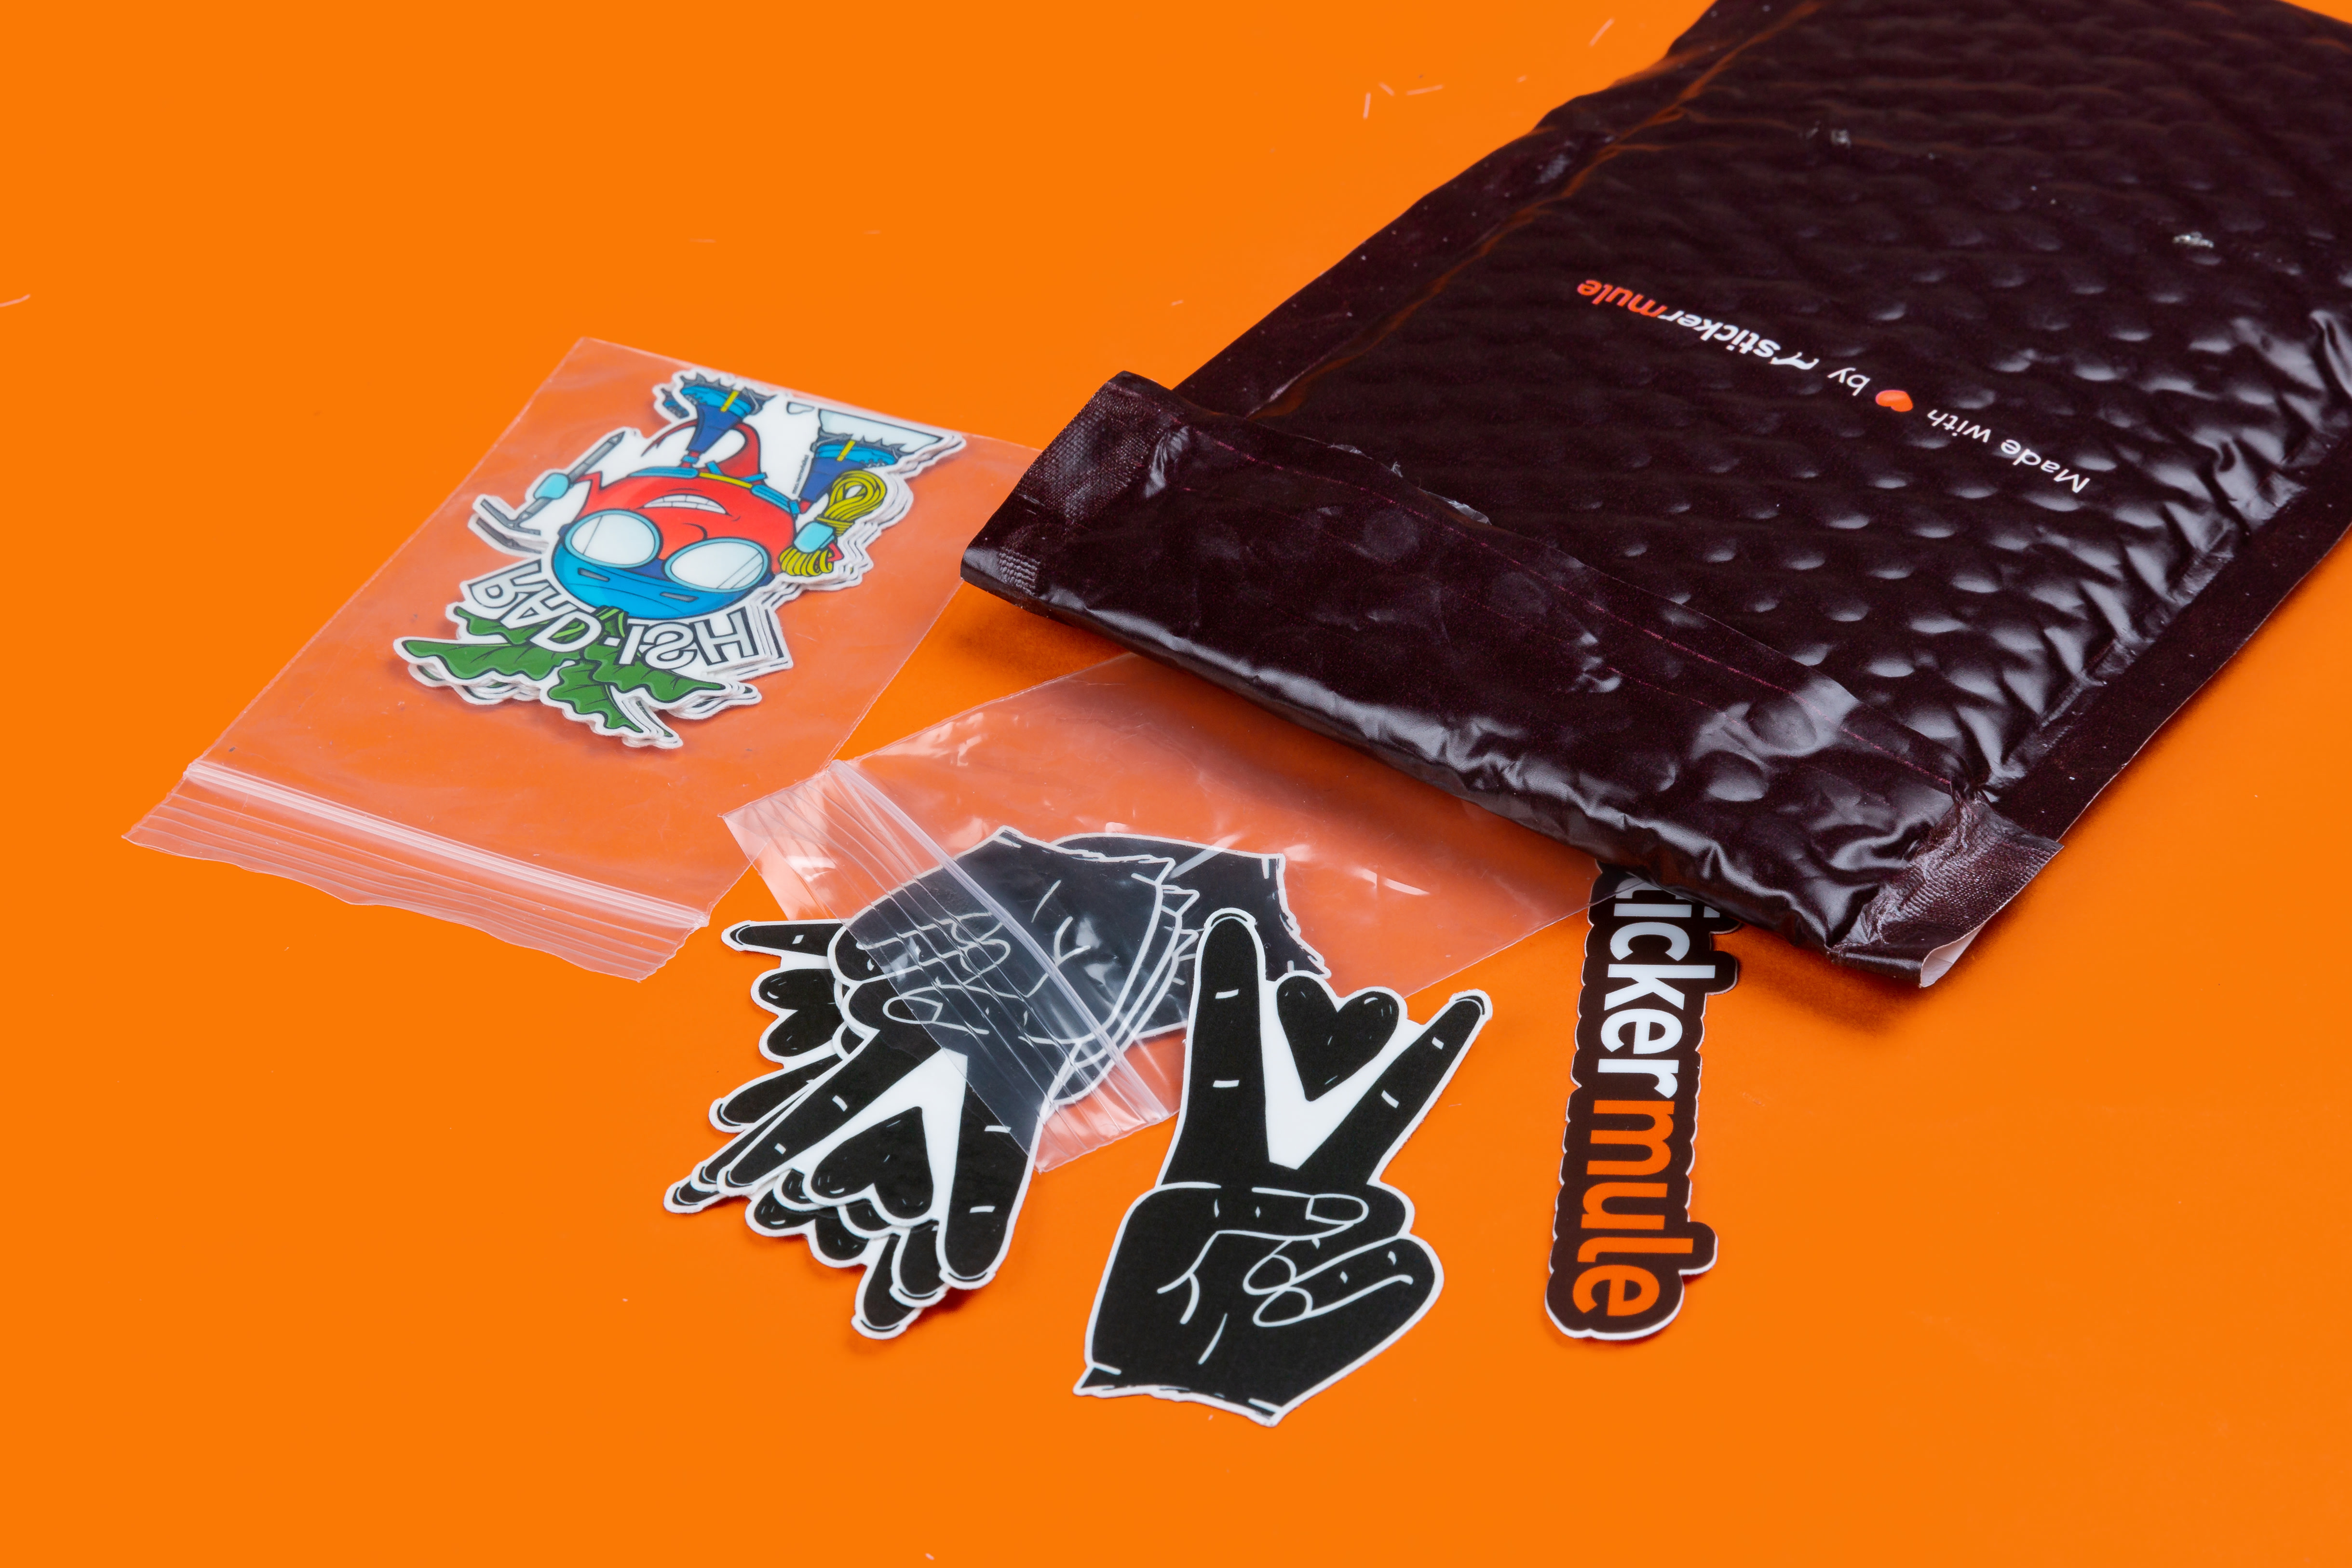 custom temporary tattoos packaged in small zip lock bags on an orange background